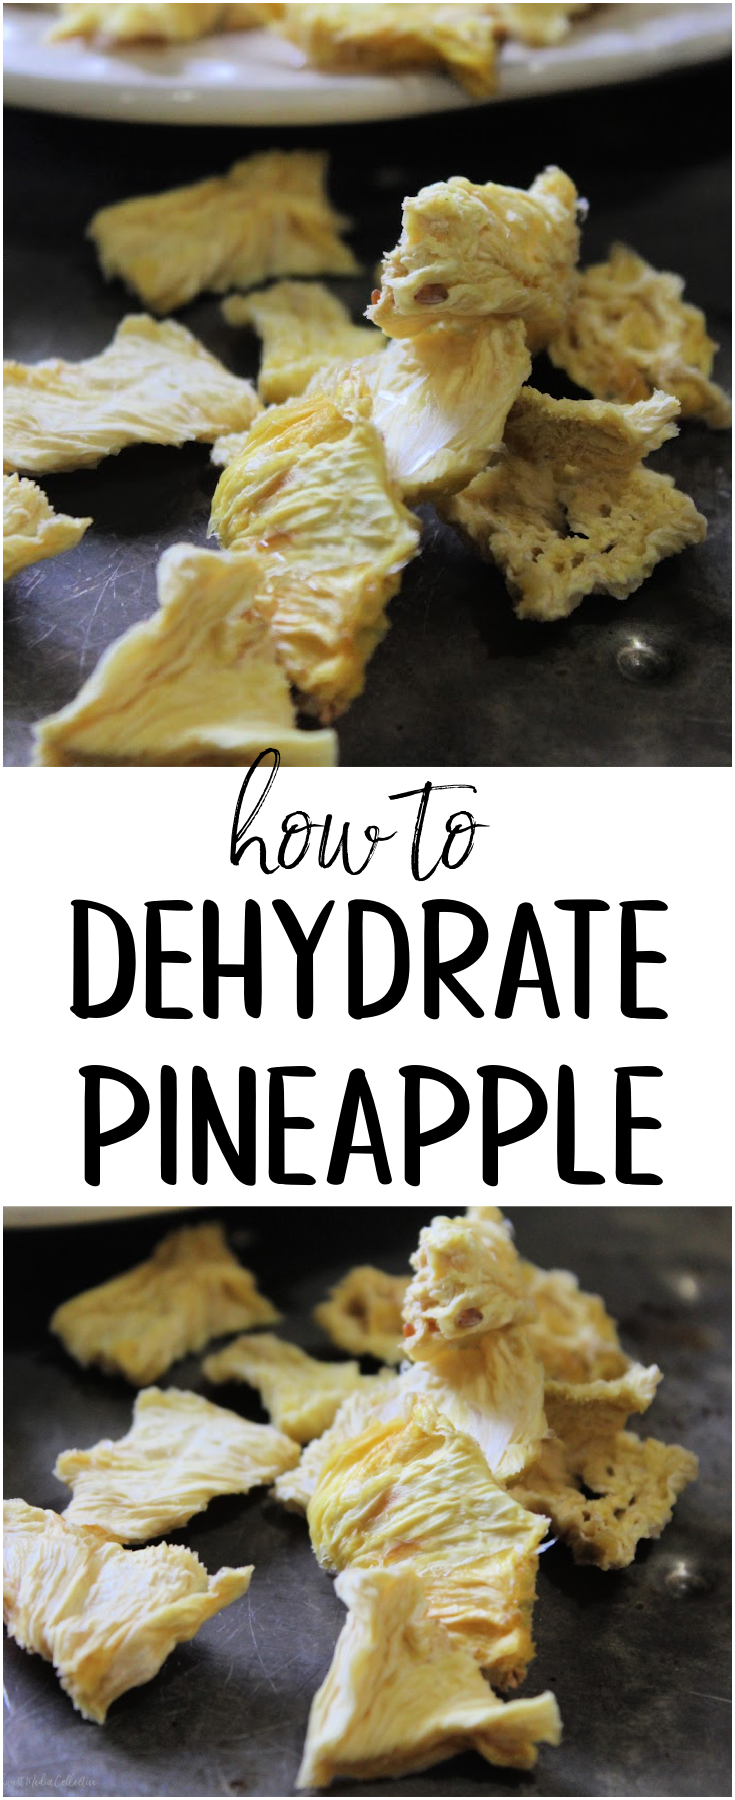 Step by step instructions to teach you to how to dehydrate pineapple in your home dehydrator - a healthy, filling and delicious snack!